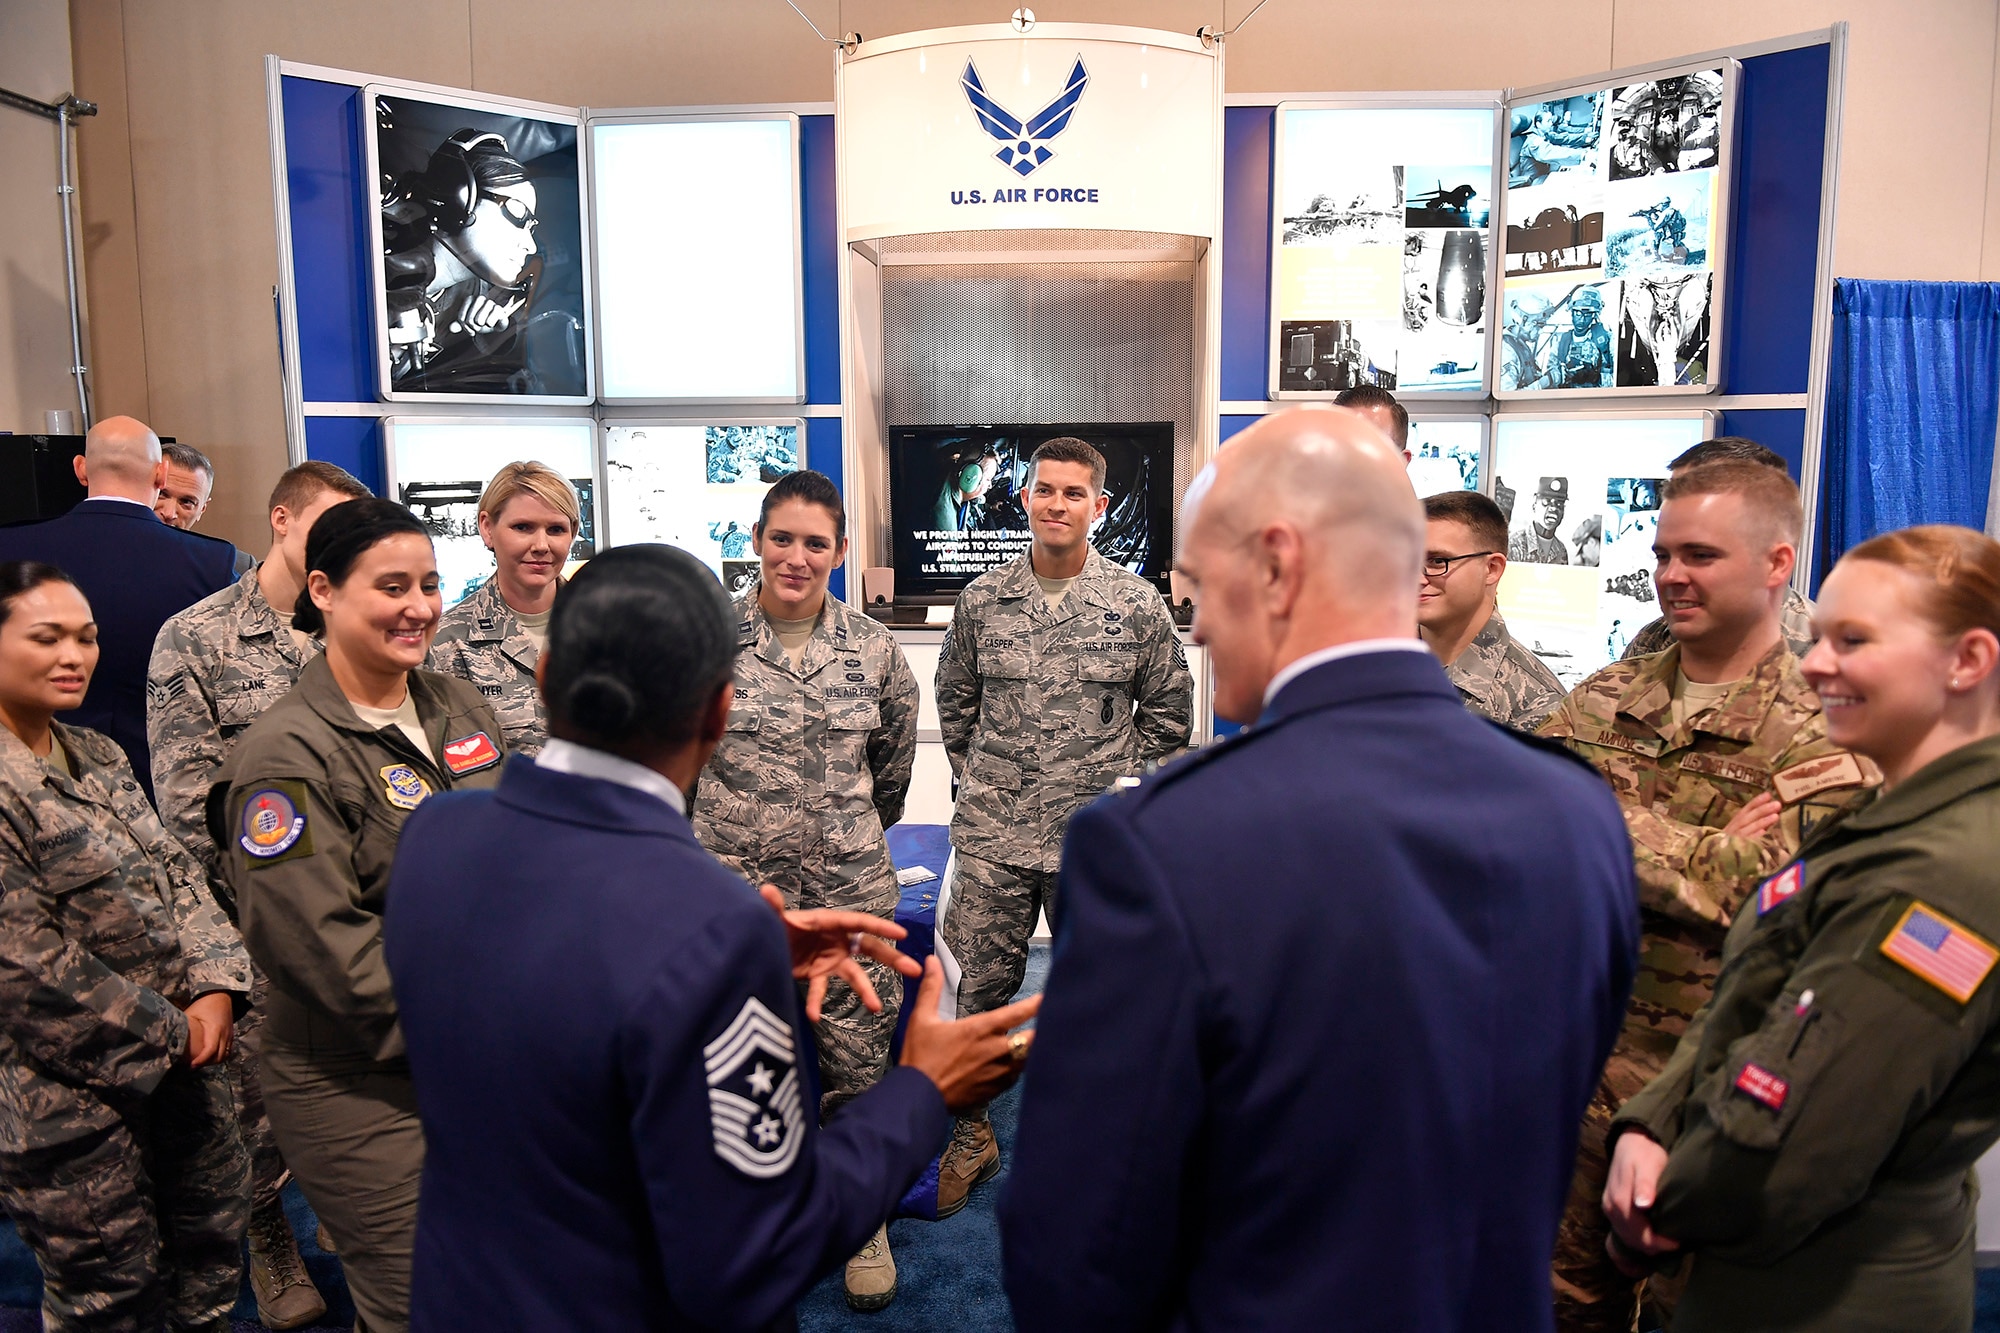 Airmen from Air Mobility Command discuss their experiences and military backgrounds with those attending the Air Force Association’s Air, Space and Cyber Conference at National Harbor, Md., Sept. 20, 2016. Three major commands, Air Force Global Strike Command, AMC, and Air Education and Training Command were represented at the American Airman Booth. (U.S. Air Force photo/Tech. Sgt. Anthony Nelson Jr.)